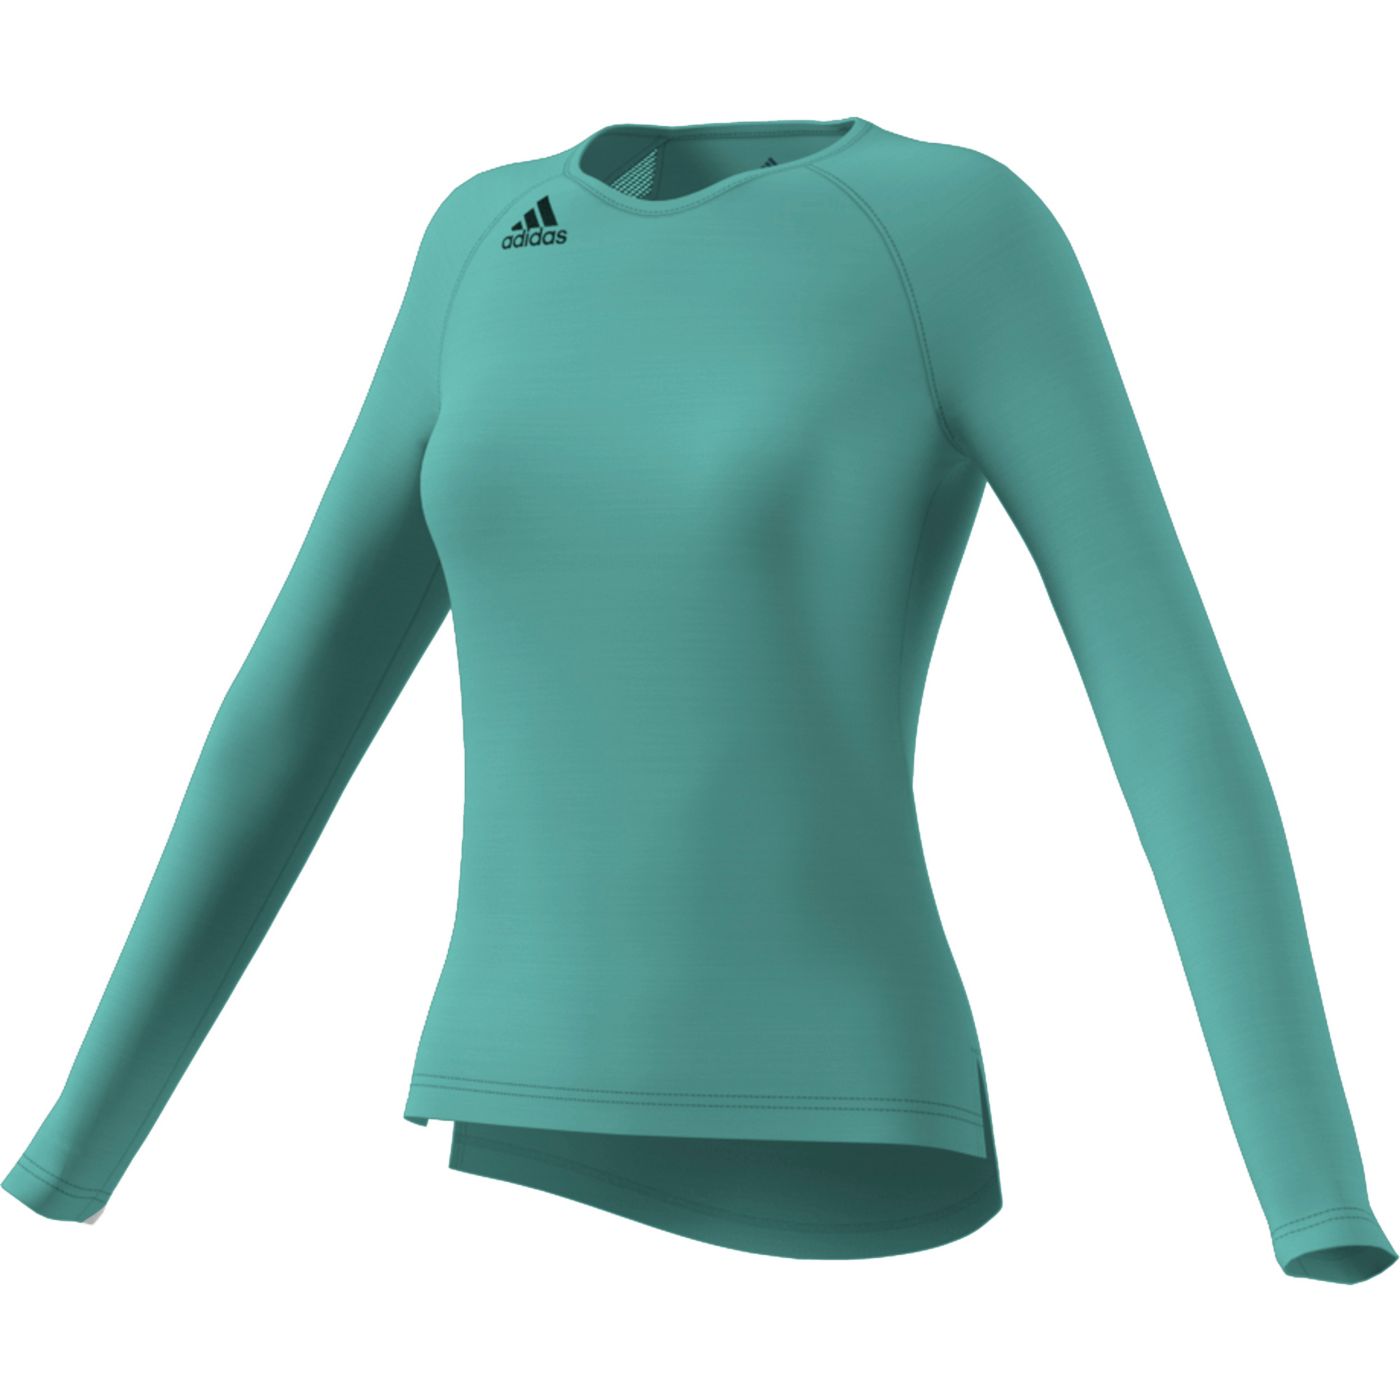 Download Adidas Women's HiLo Long Sleeve Jersey | DICK'S Sporting Goods